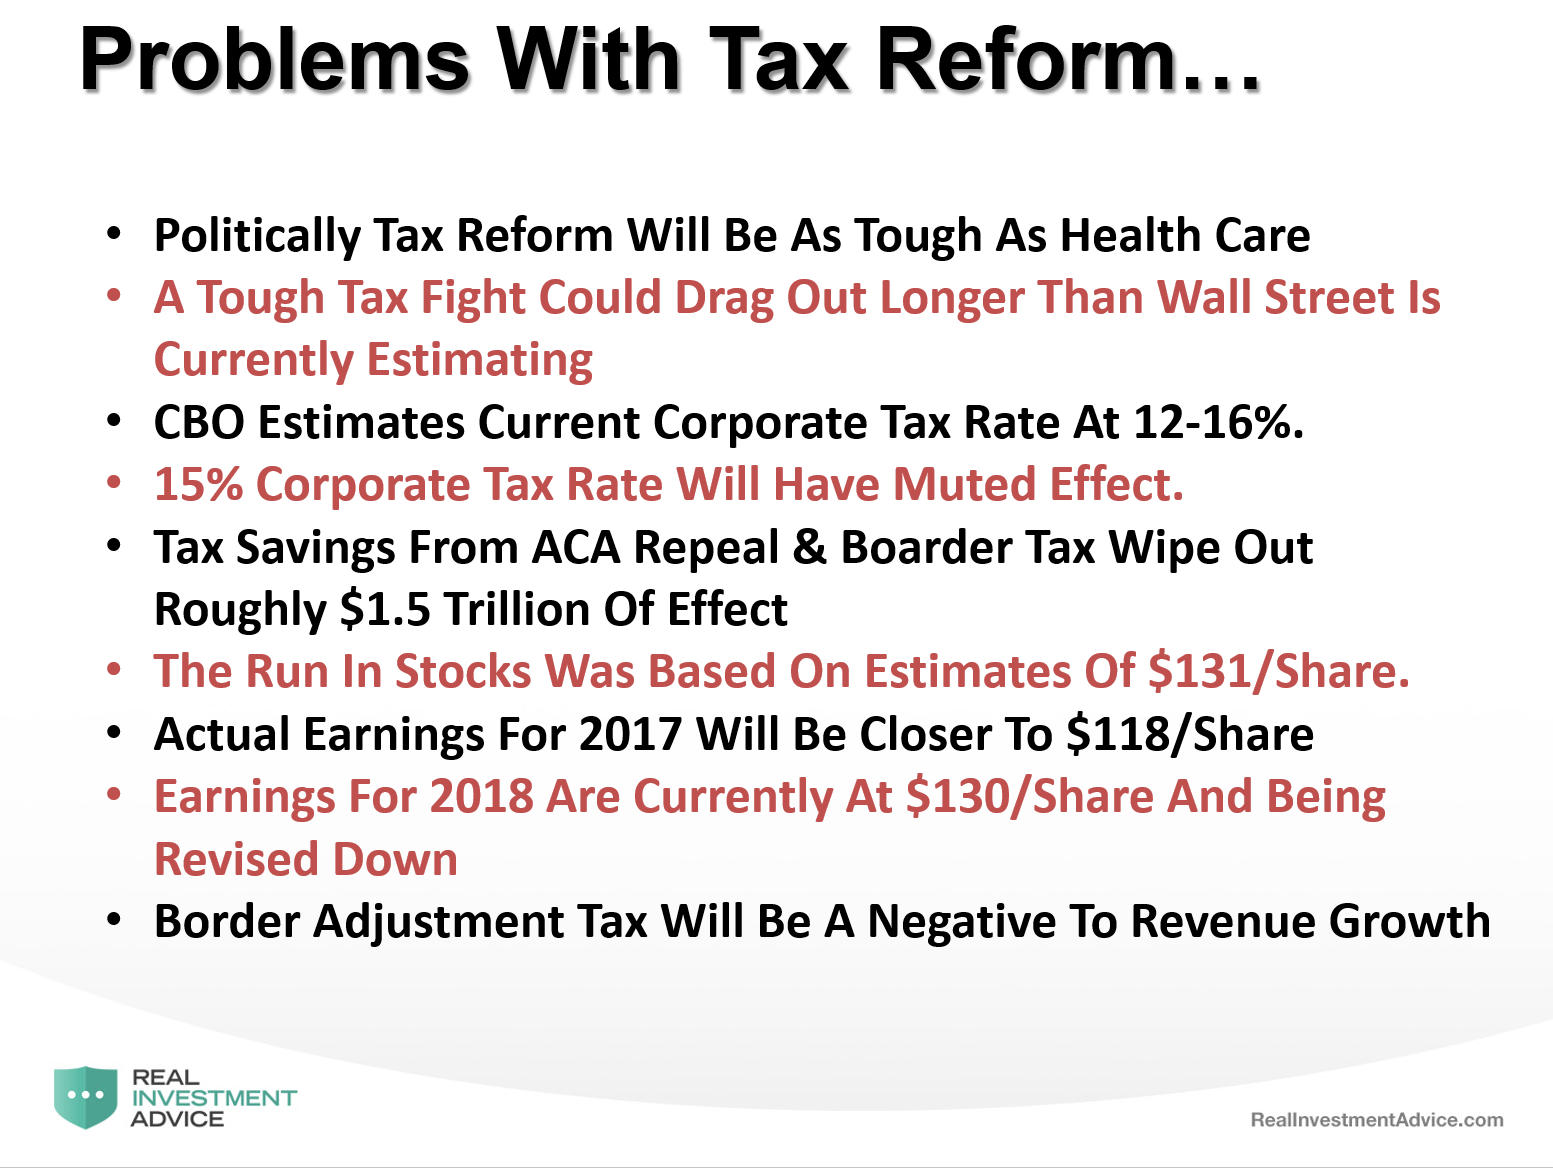 Problems with Tax Reform, Tax Cuts and Infrastructure Spending